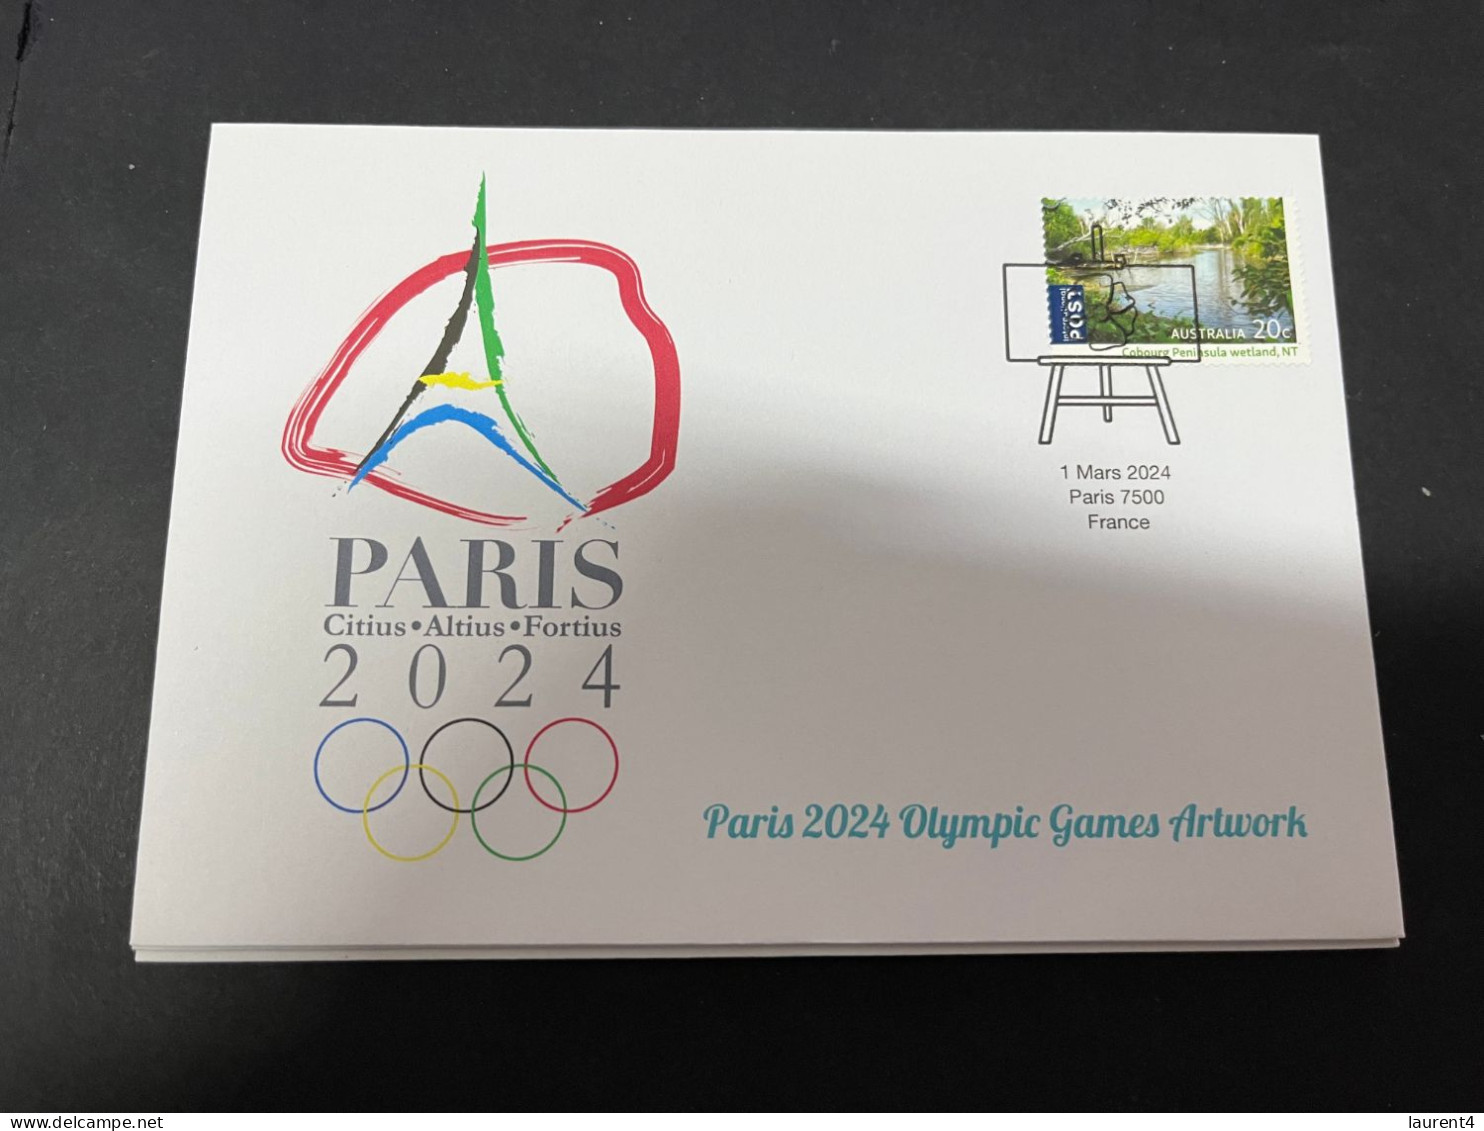 8-3-2024 (2 Y 30) Paris Olympic Games 2024 - 1 (of 12 Covers Series) For The Paris 2024 Olympic Games Artwork - Verano 2024 : París